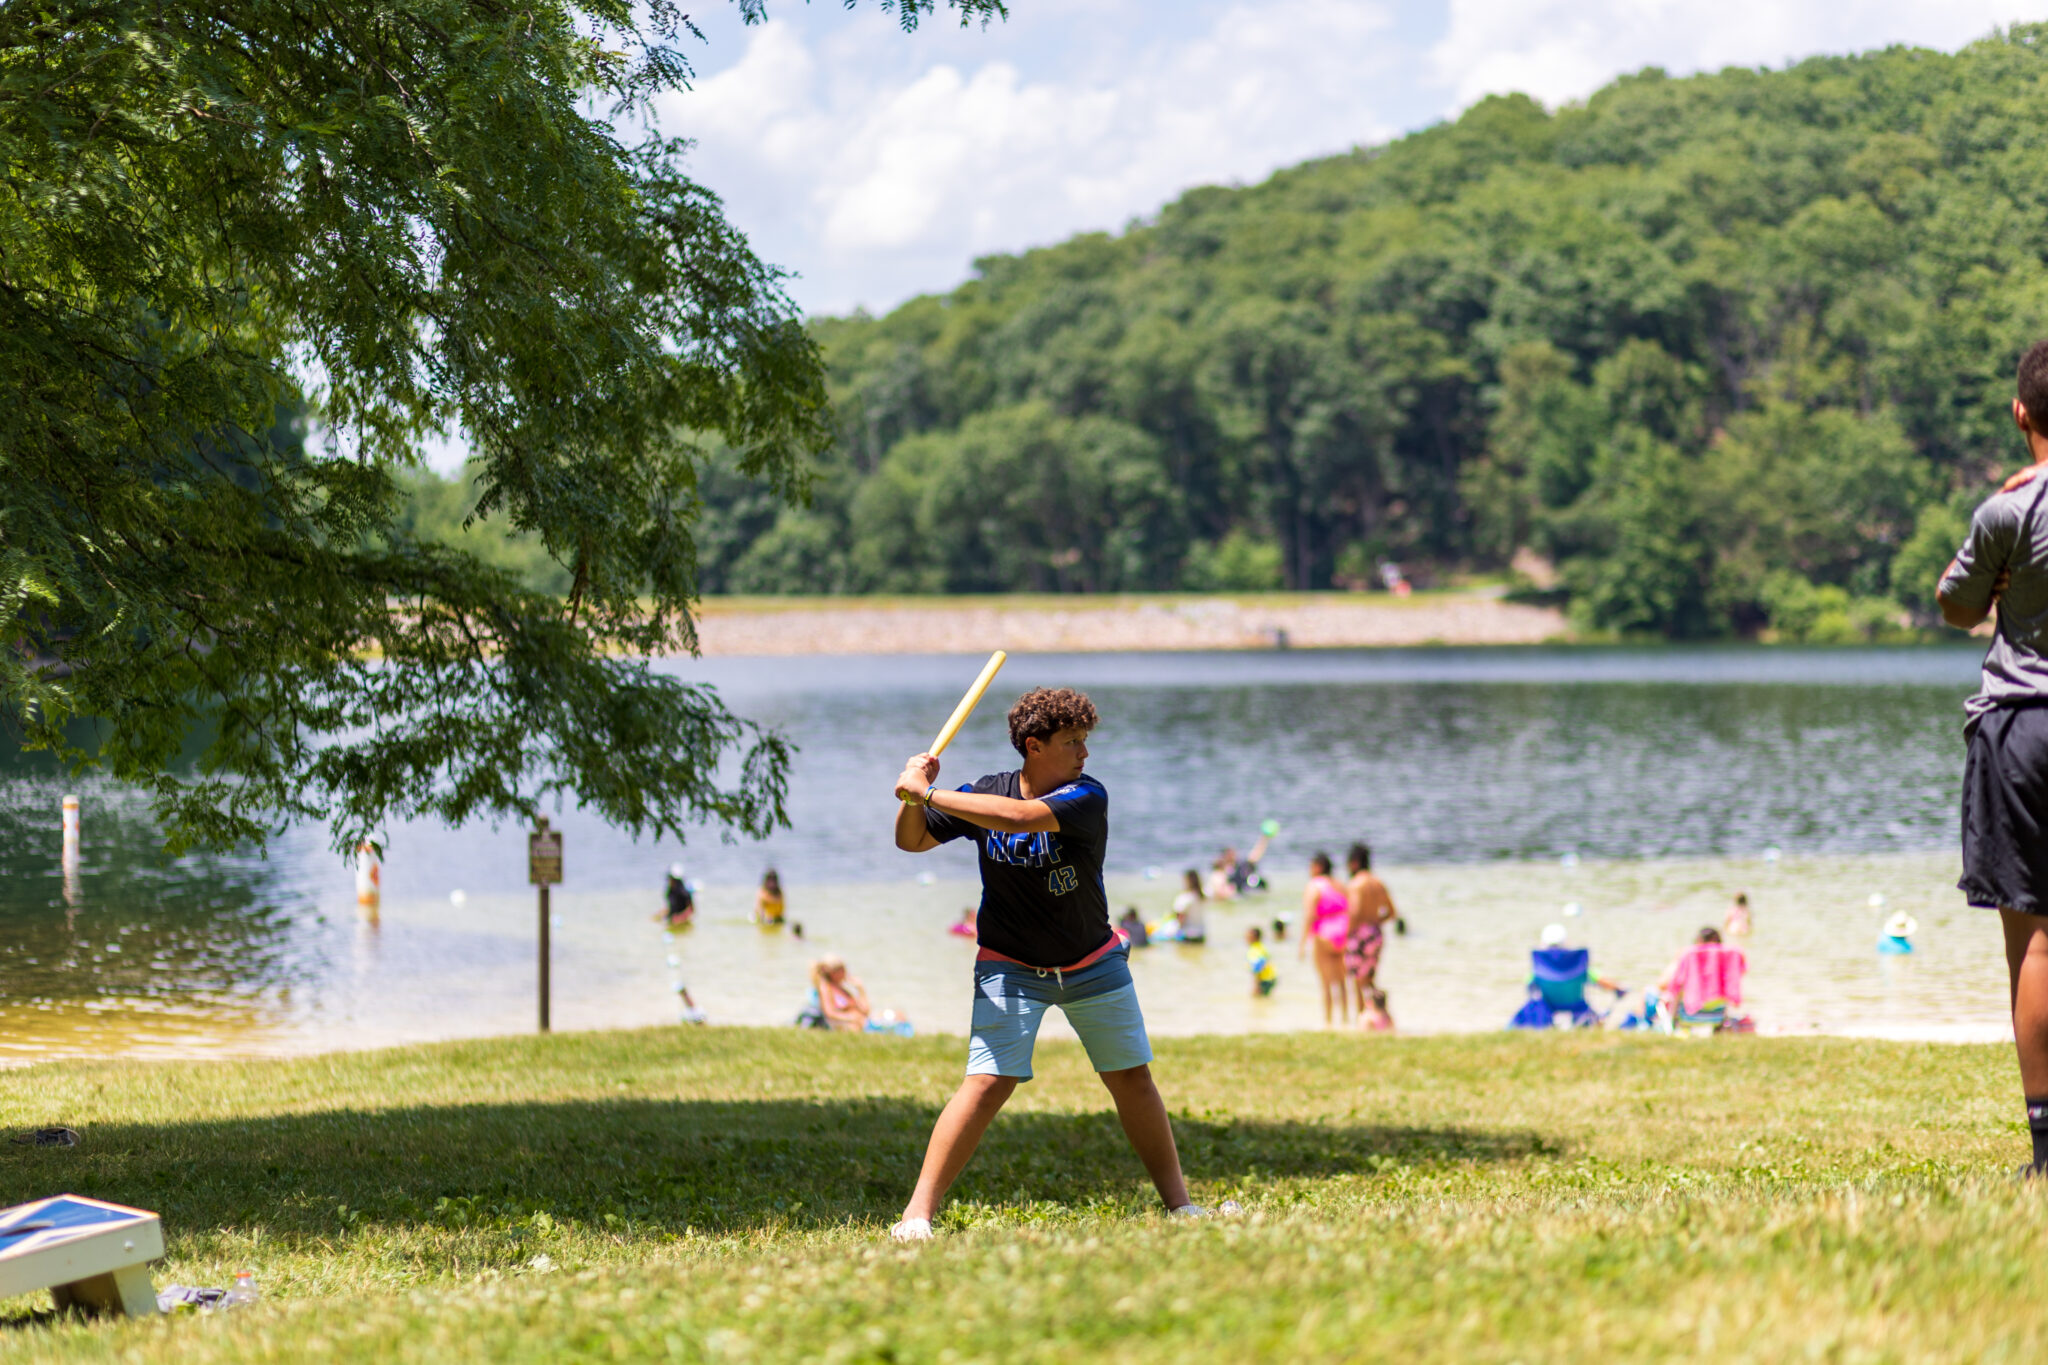 A boy participating in the P.L.E.D.G.E. Leadership Program is swinging a bat in front of a lake.